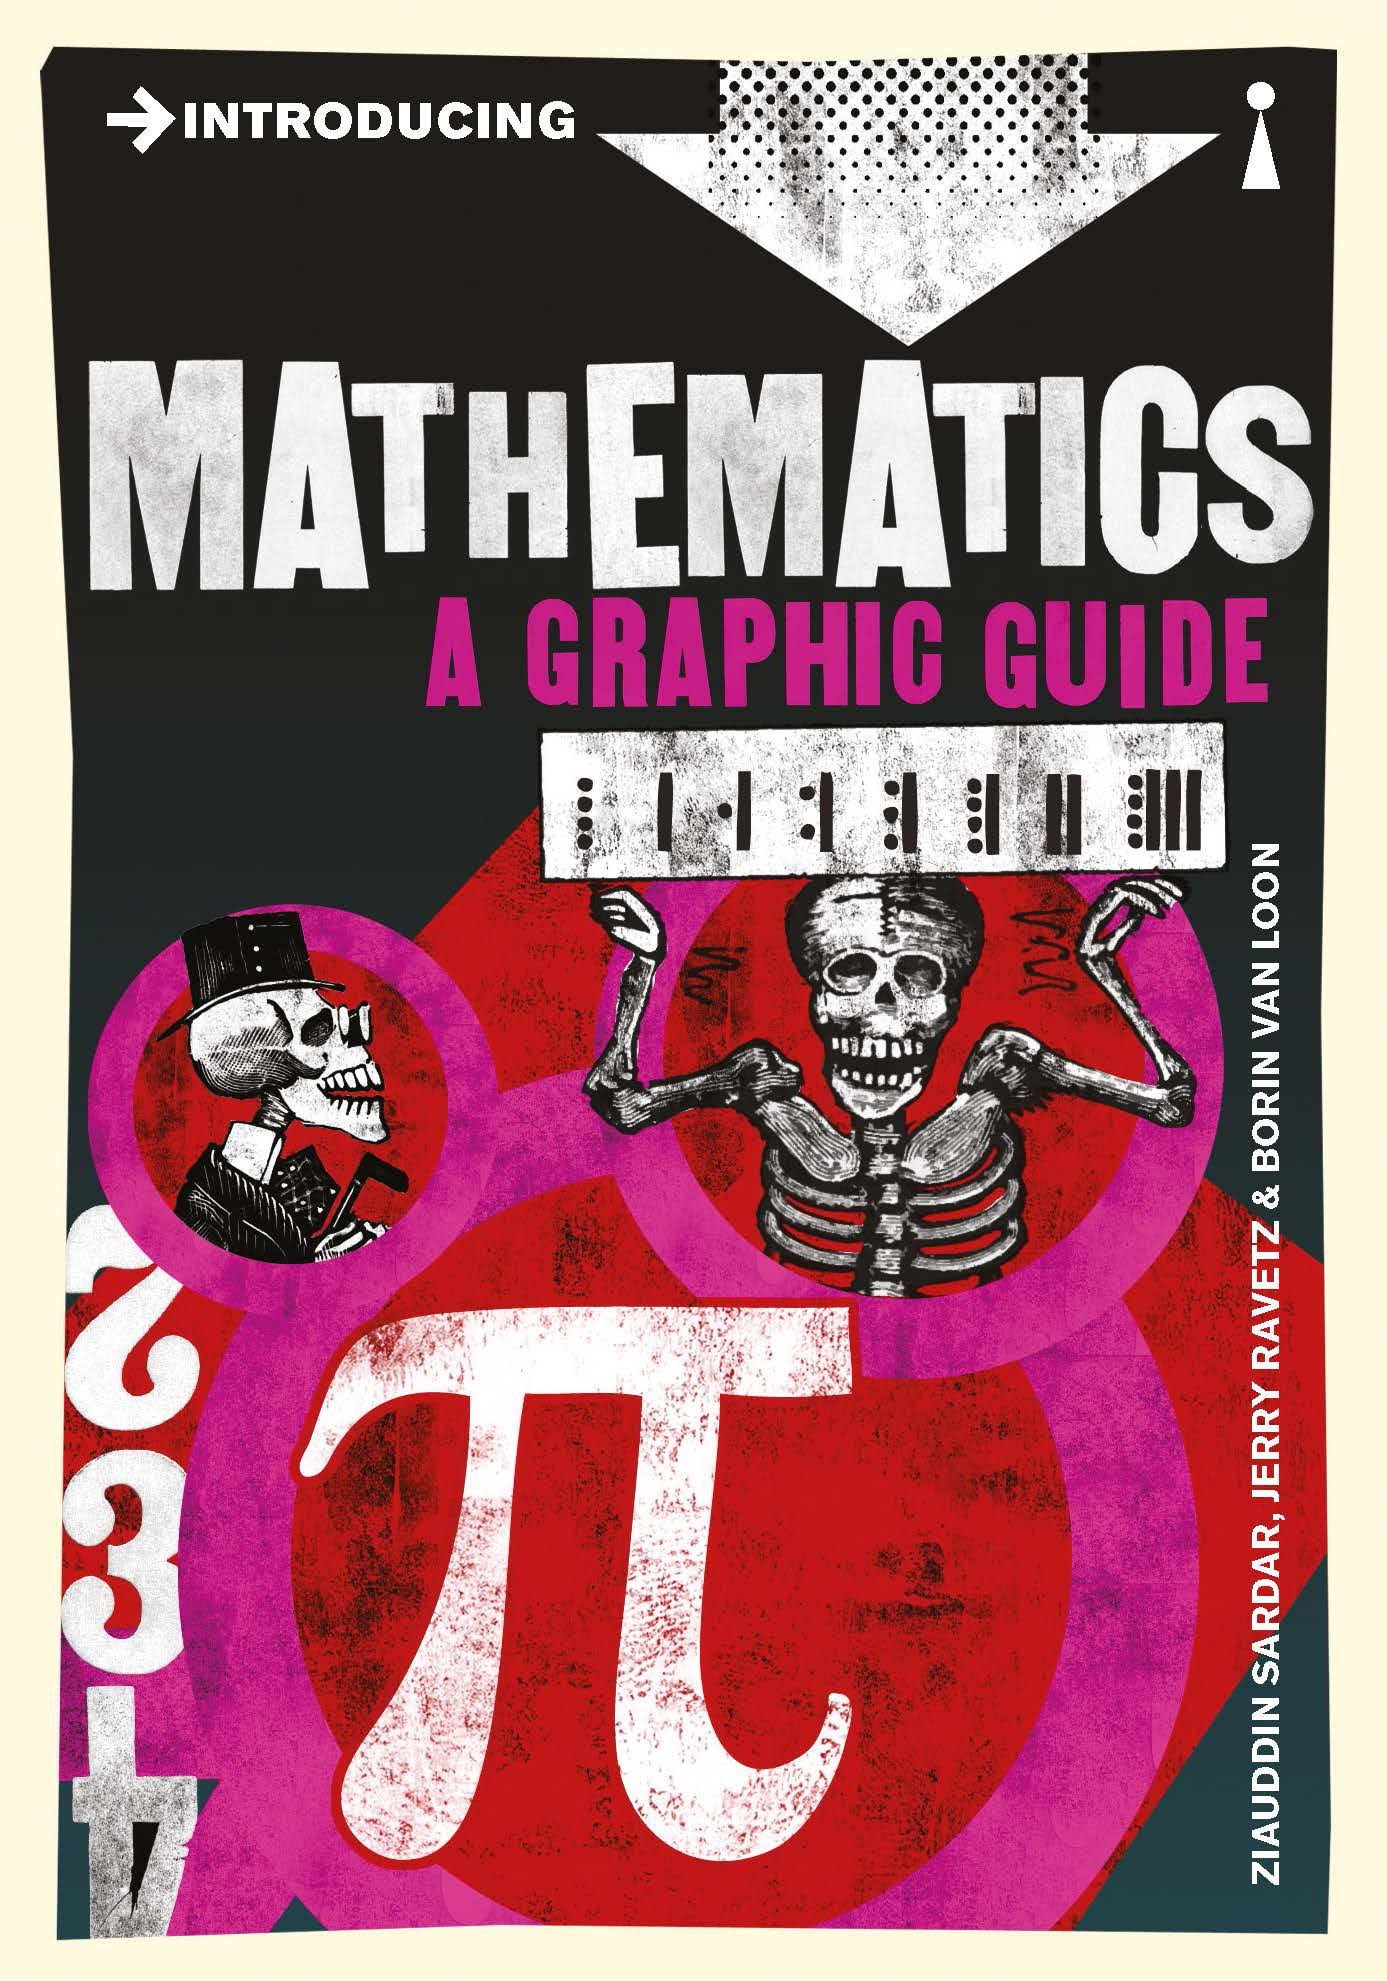 Introducing Mathematics - A Graphic Guide